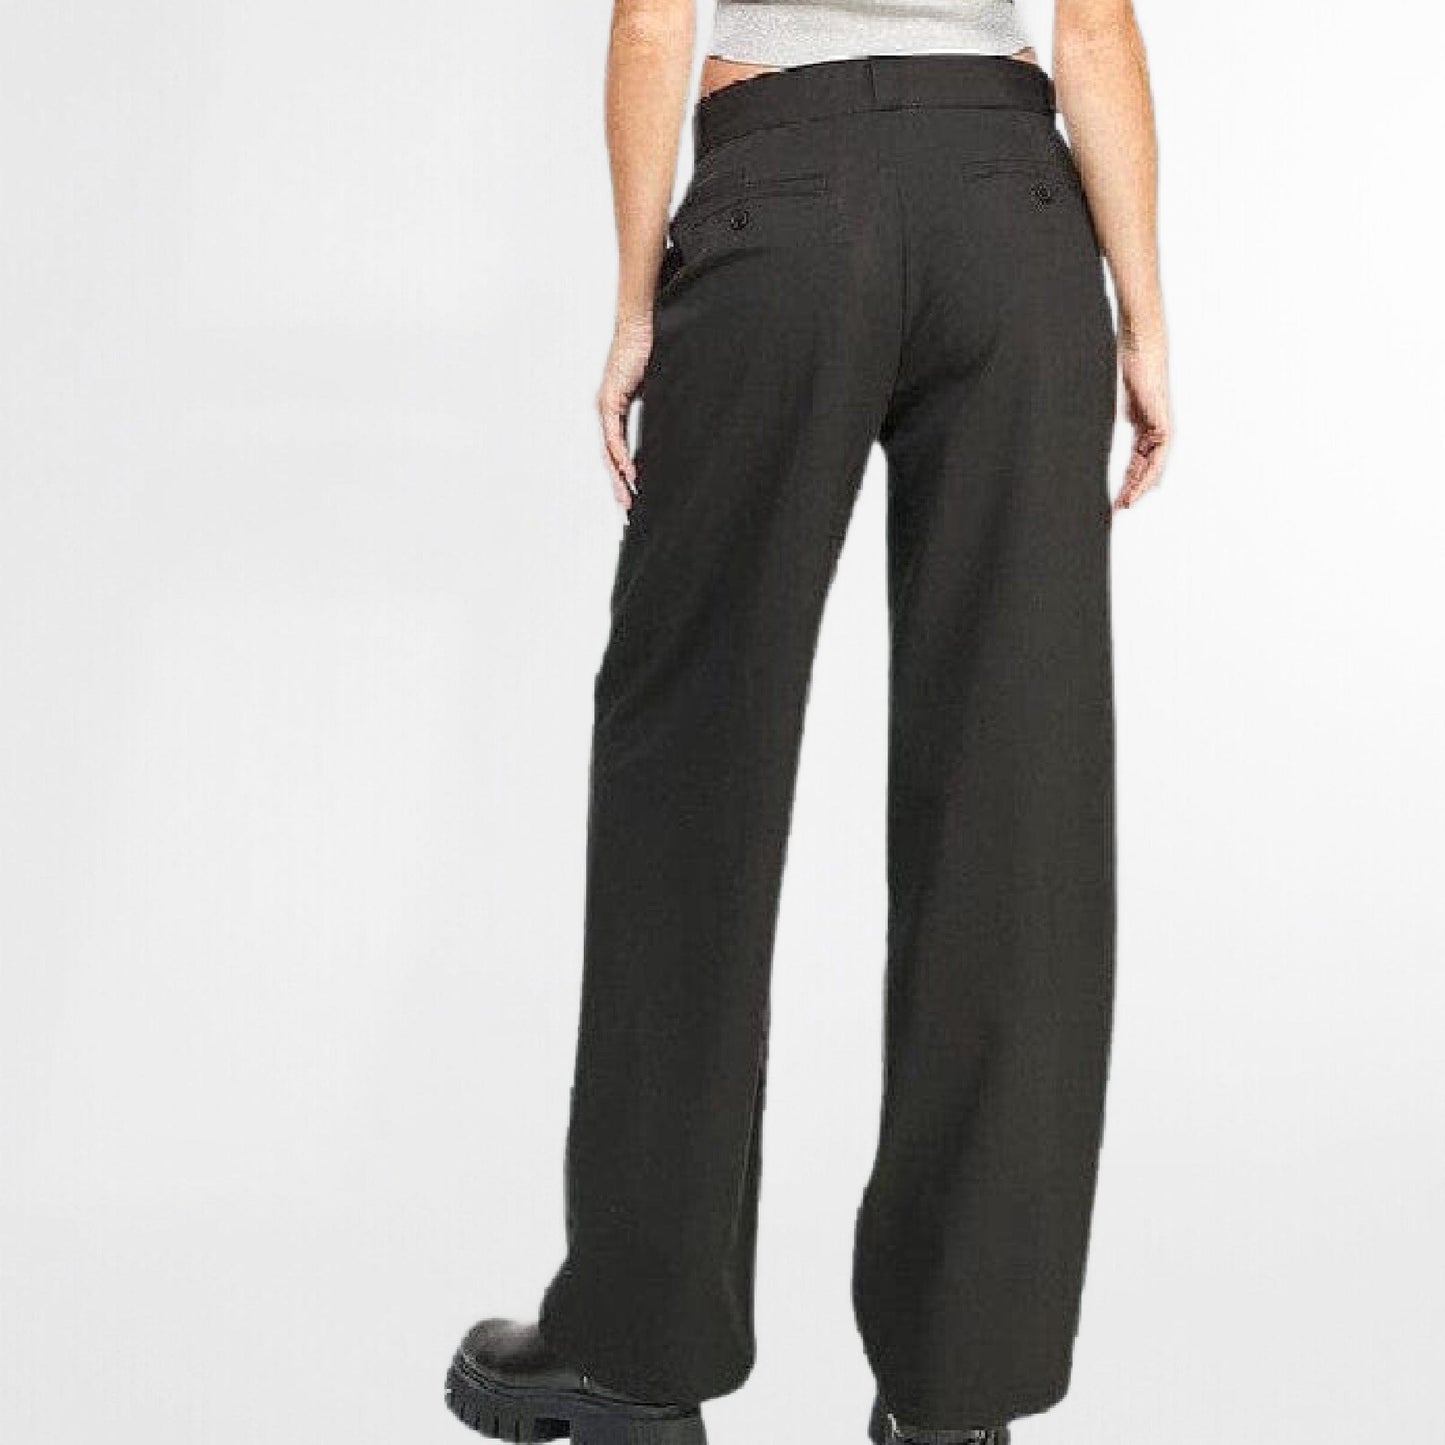 The Perfect Relaxed Fit High Rise Trouser Posh Society Boutique Pants Visit poshsocietyhb